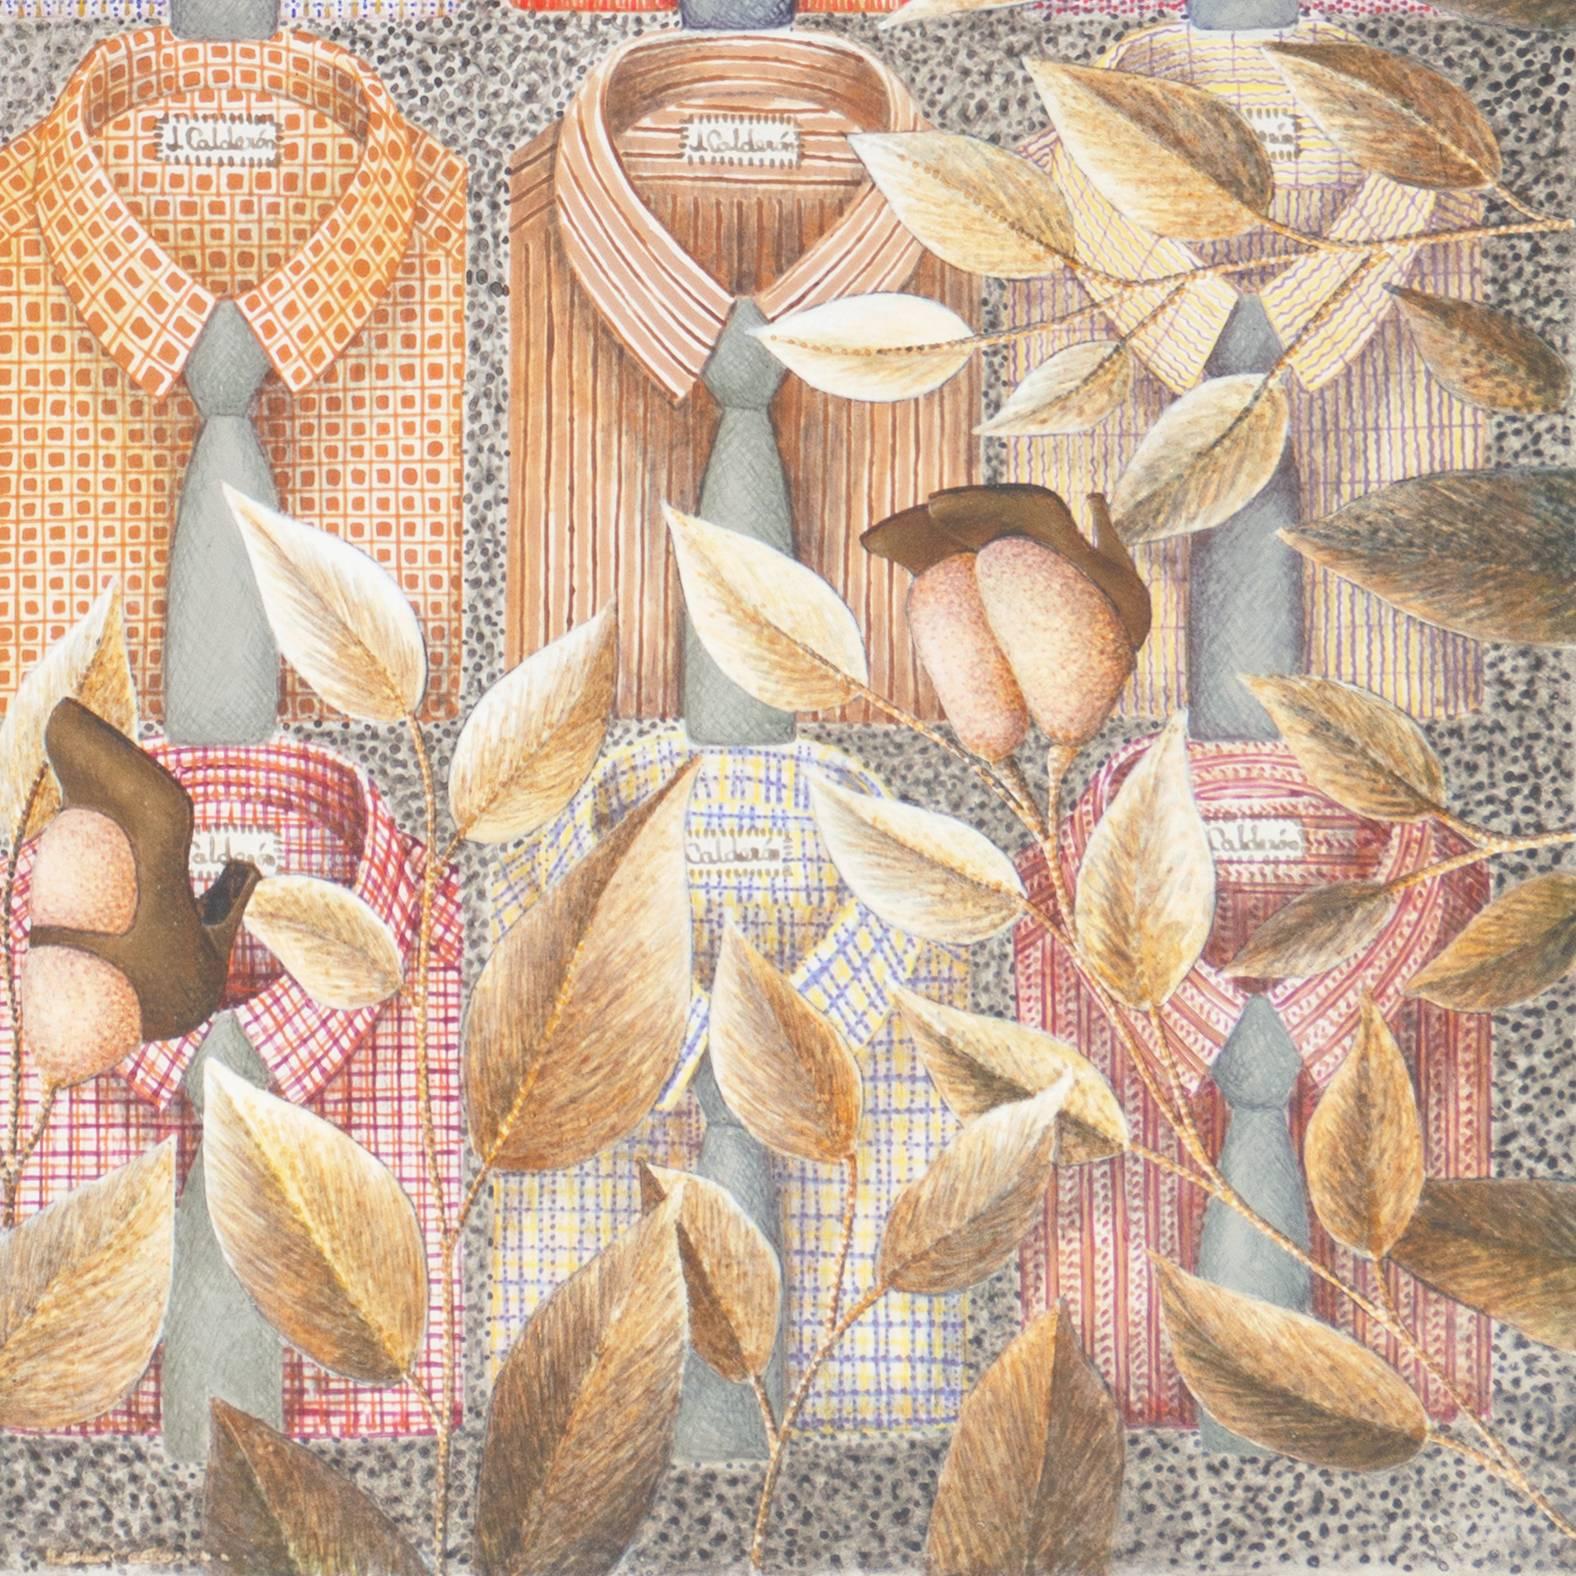 Surrealist Fashion Painting with Dress Shirts and High Heel Shoes - Beige Still-Life Painting by Juan Calderón